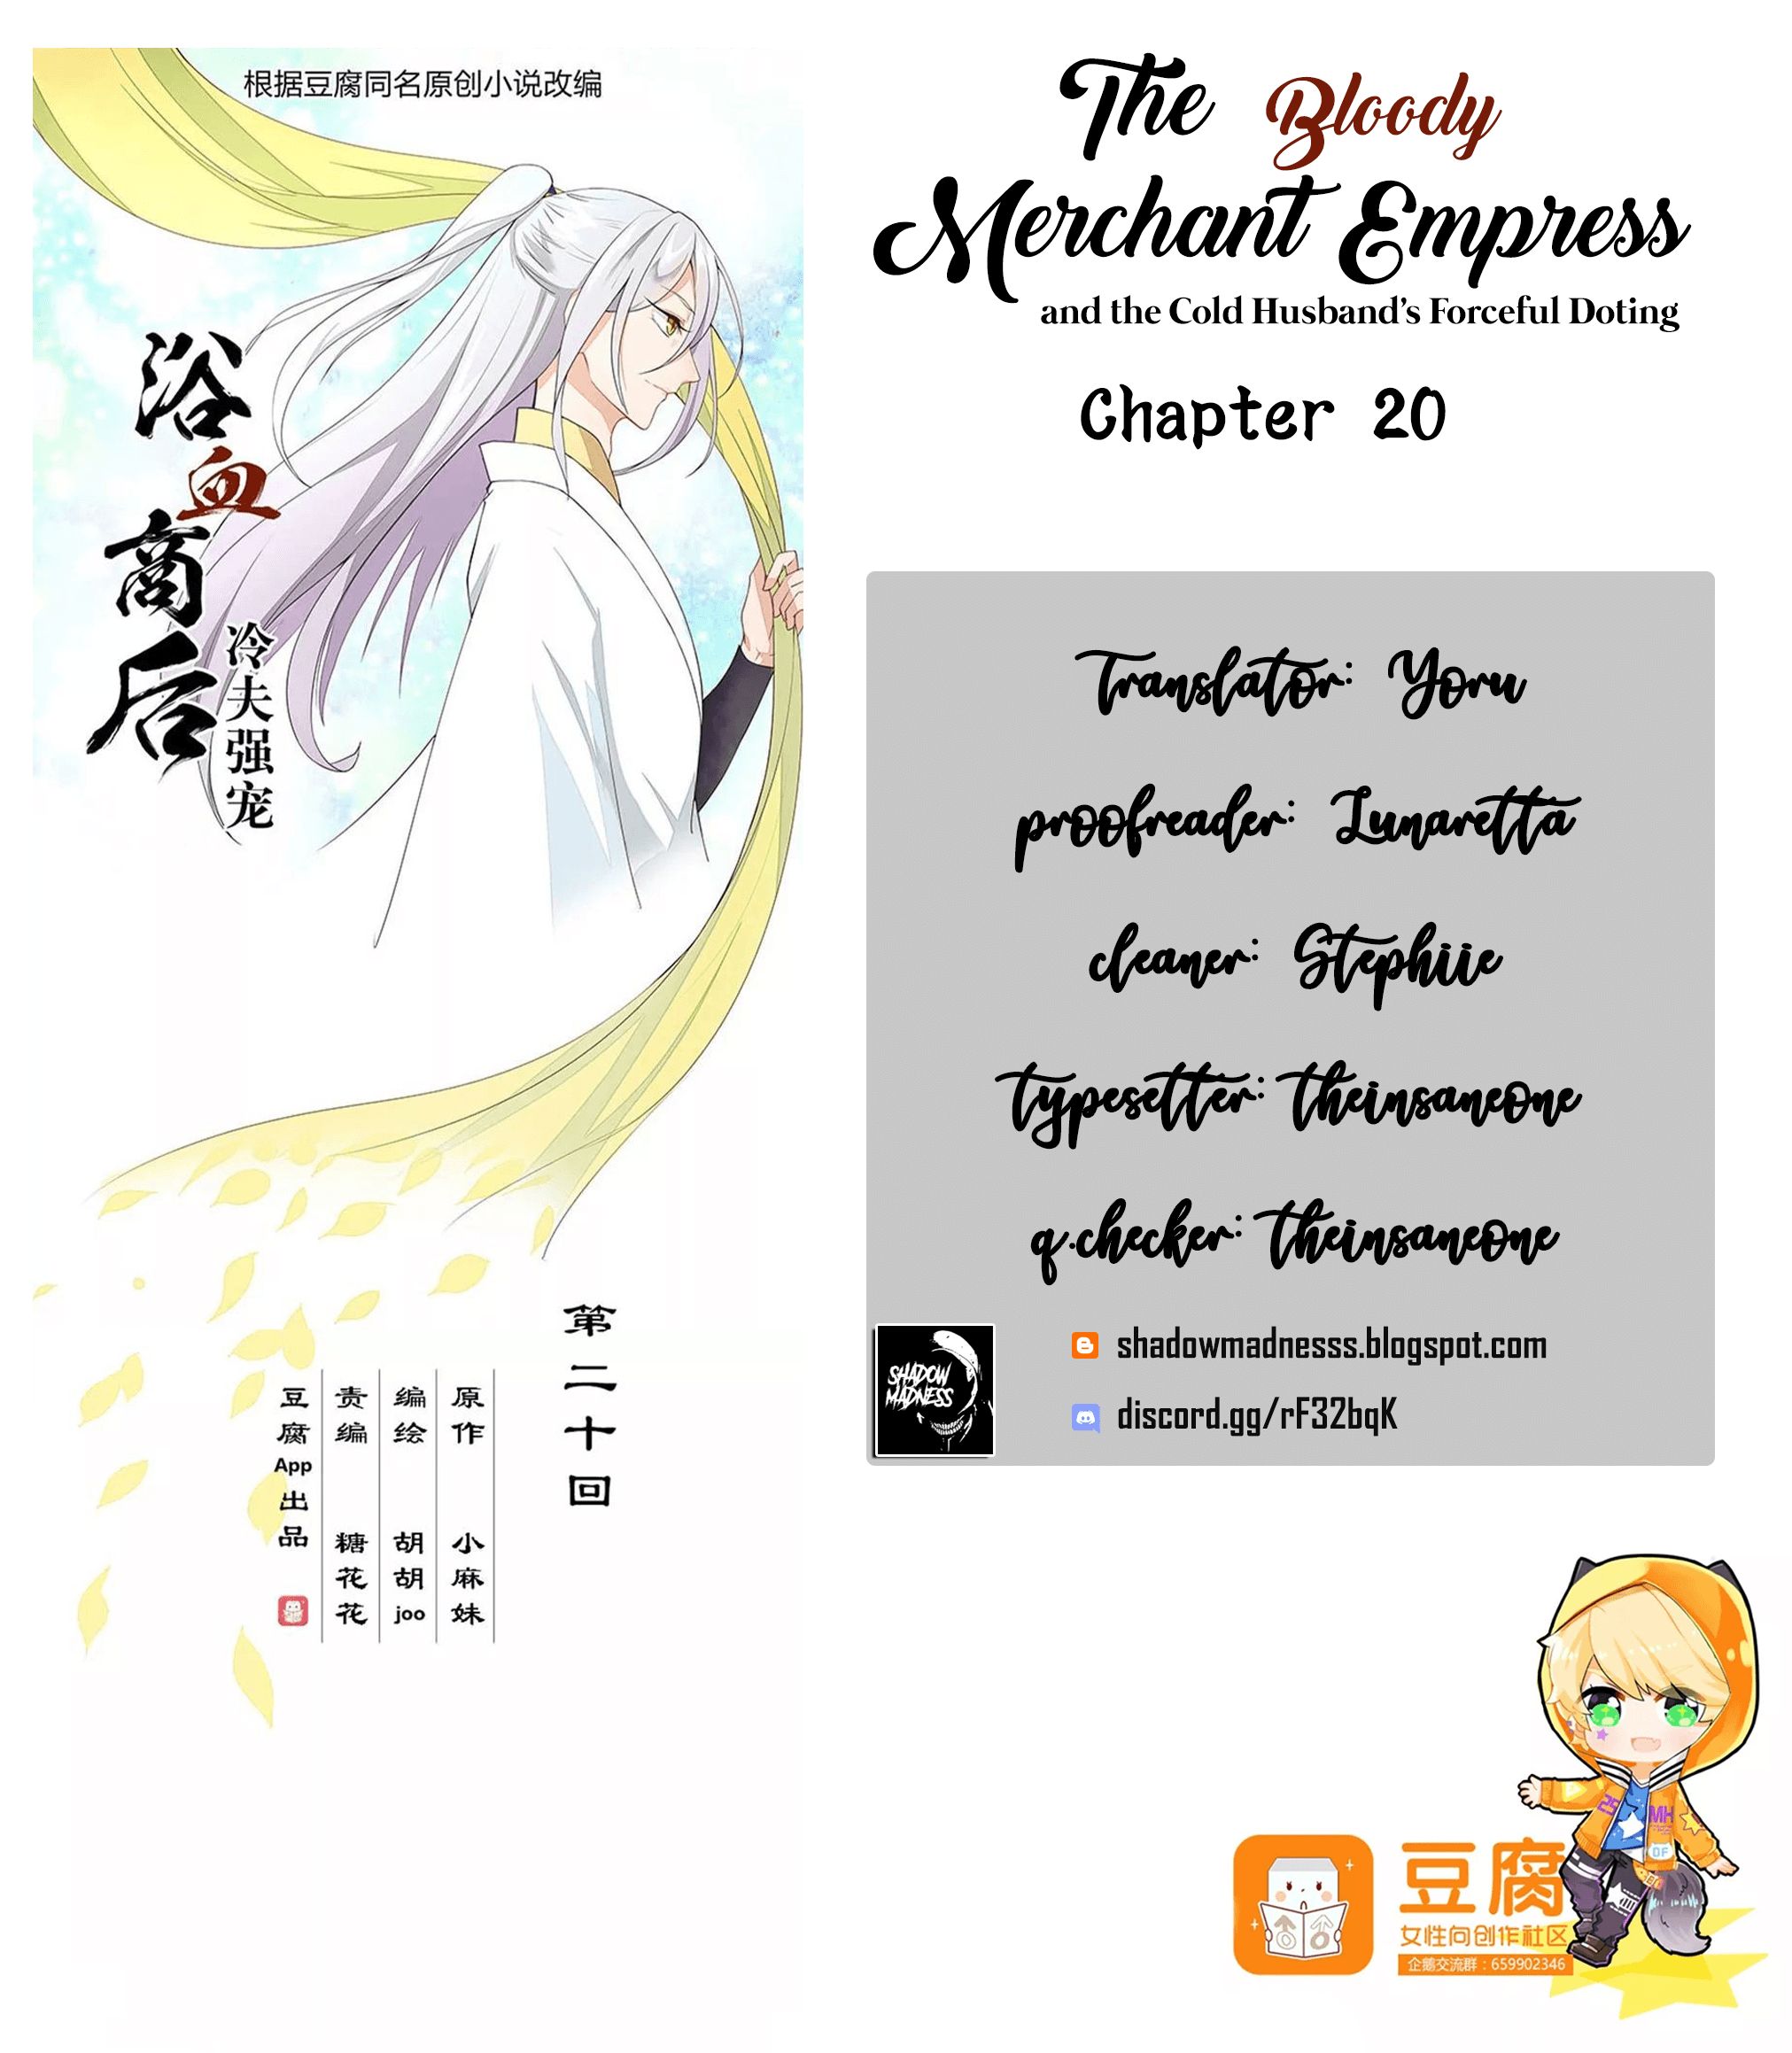 The Bloody Merchant Empress and the Cold Husband's Forceful Doting Chapter 20